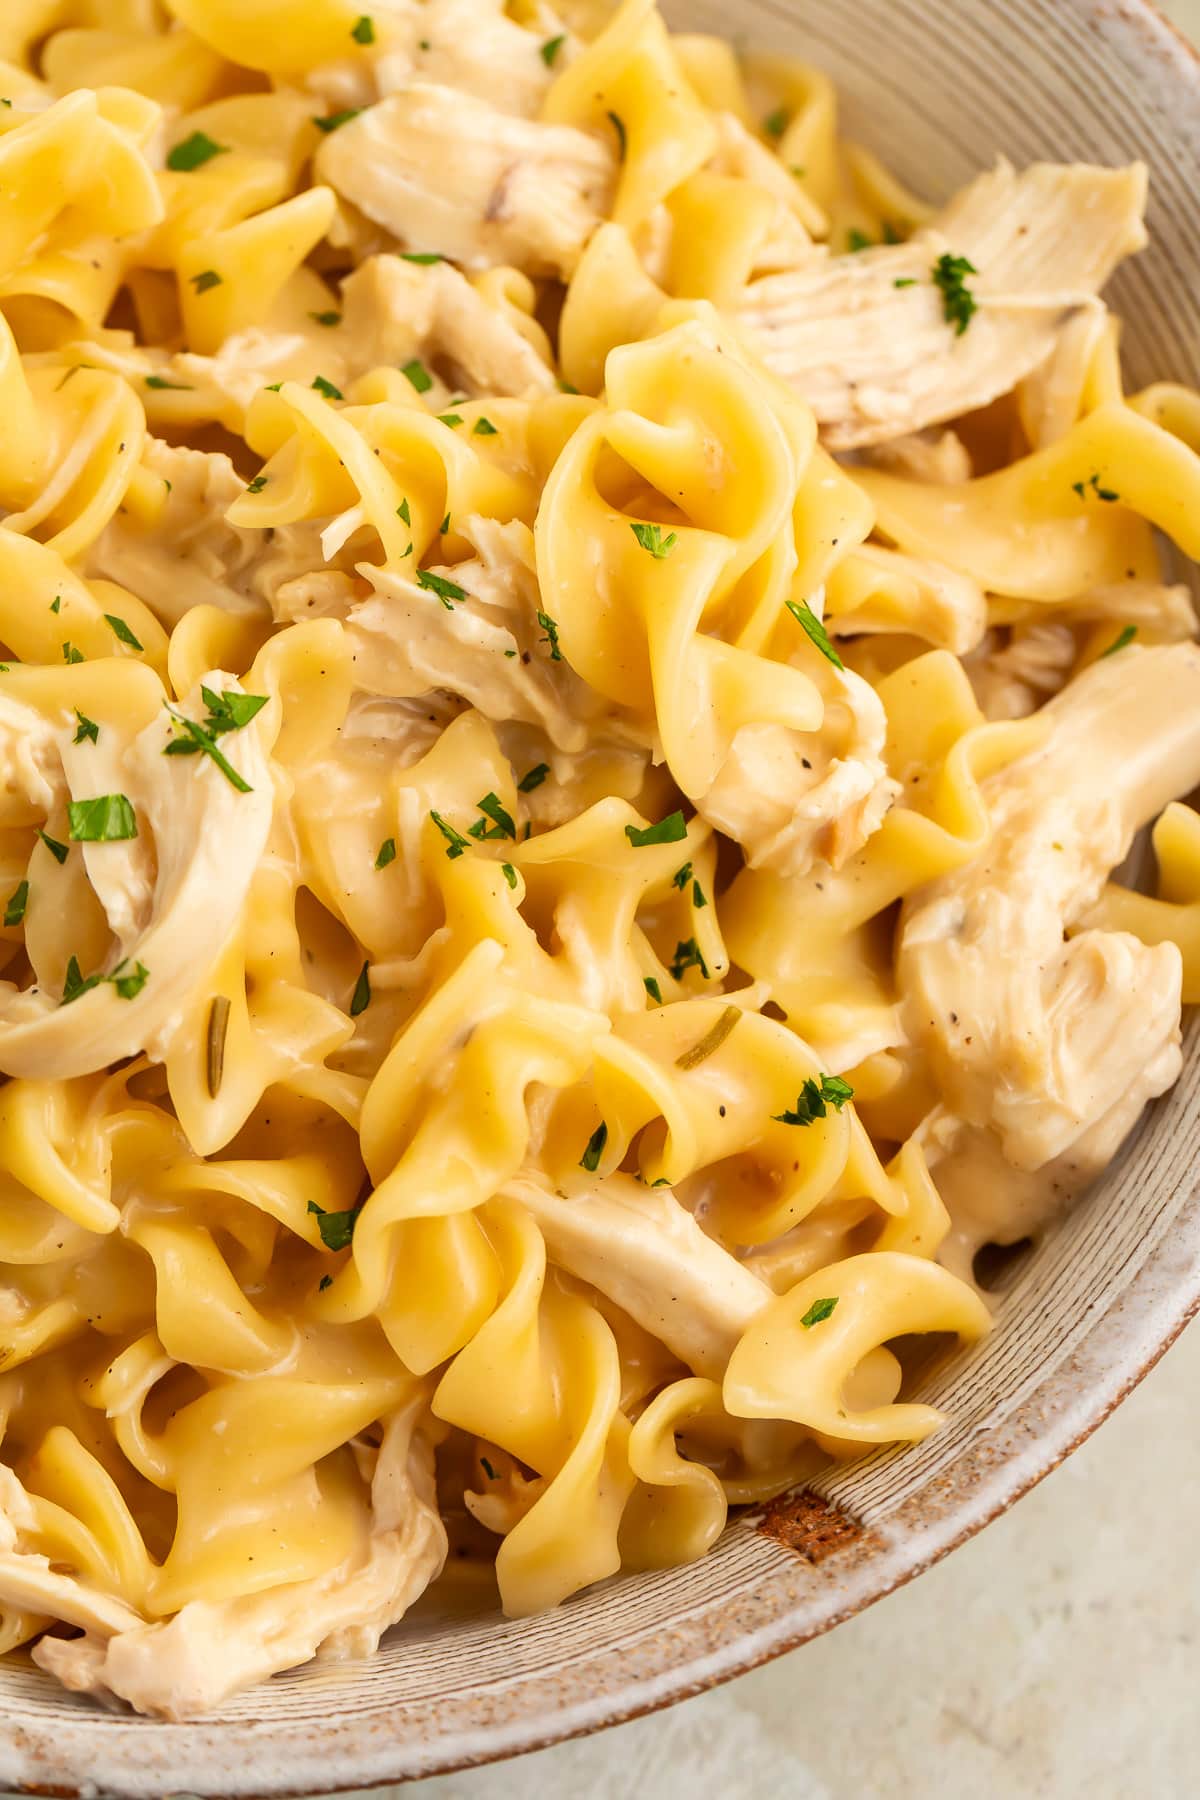 Instant Pot chicken and noodles in a large white bowl, shot close-up to show the chunks of chicken and twisty noodles.